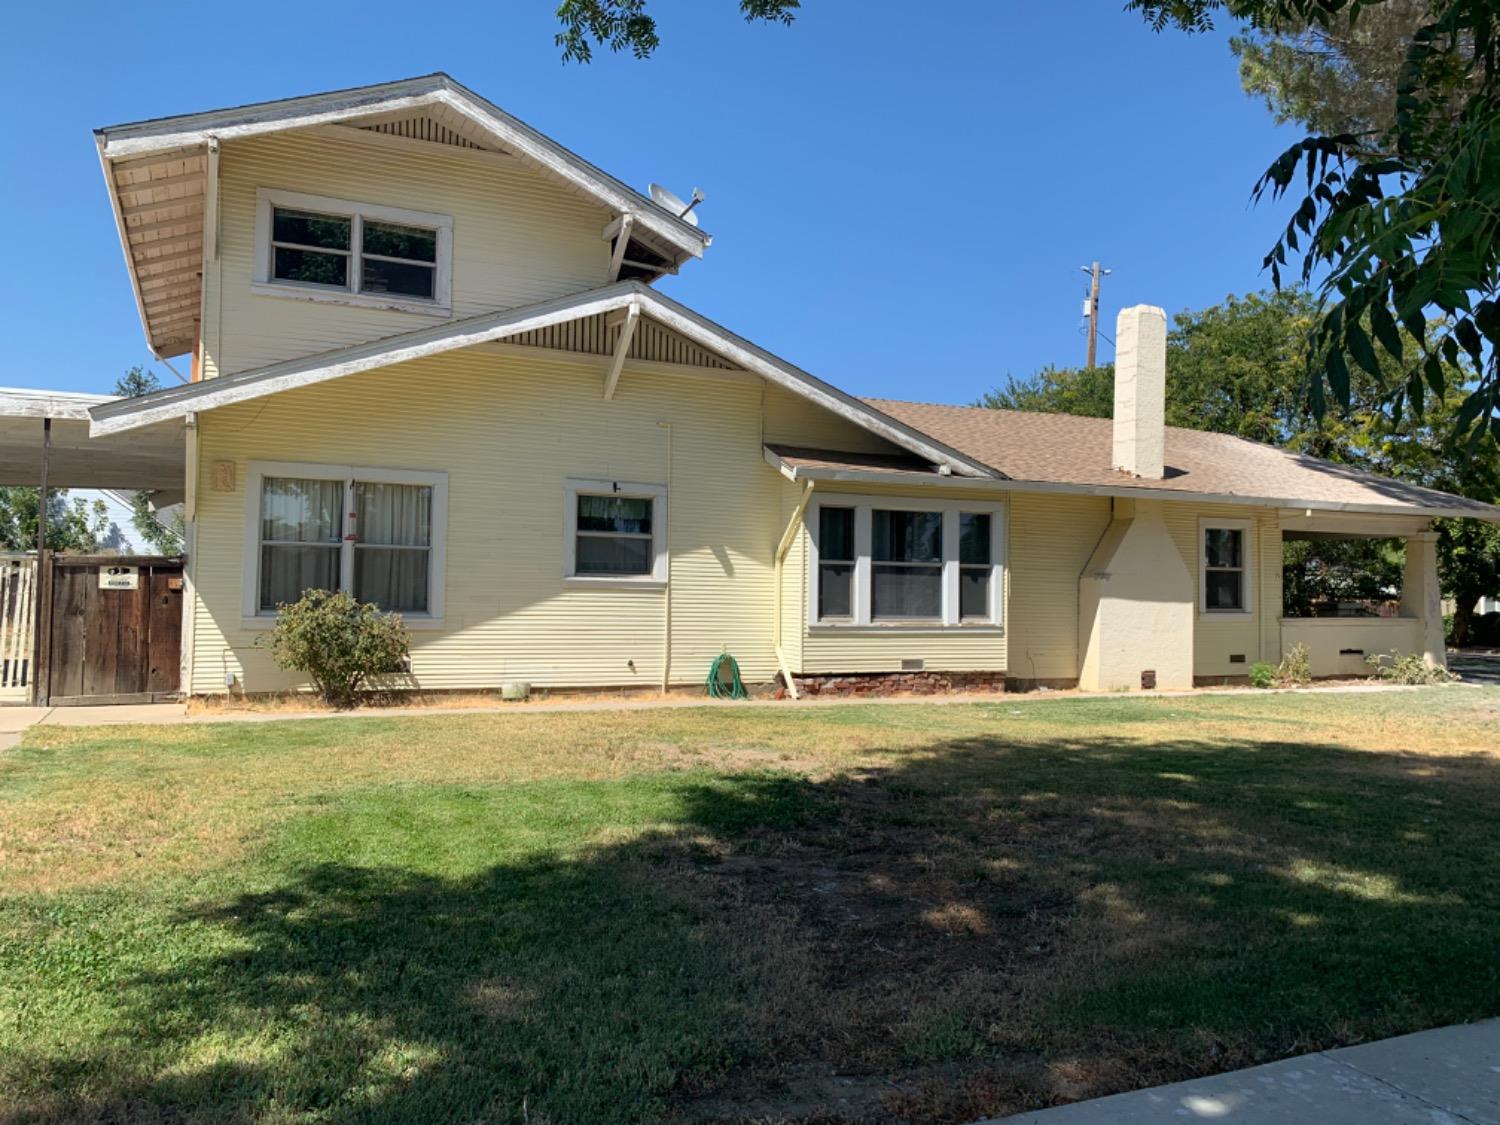 Photo of 285 Laurel Ave in Gustine, CA